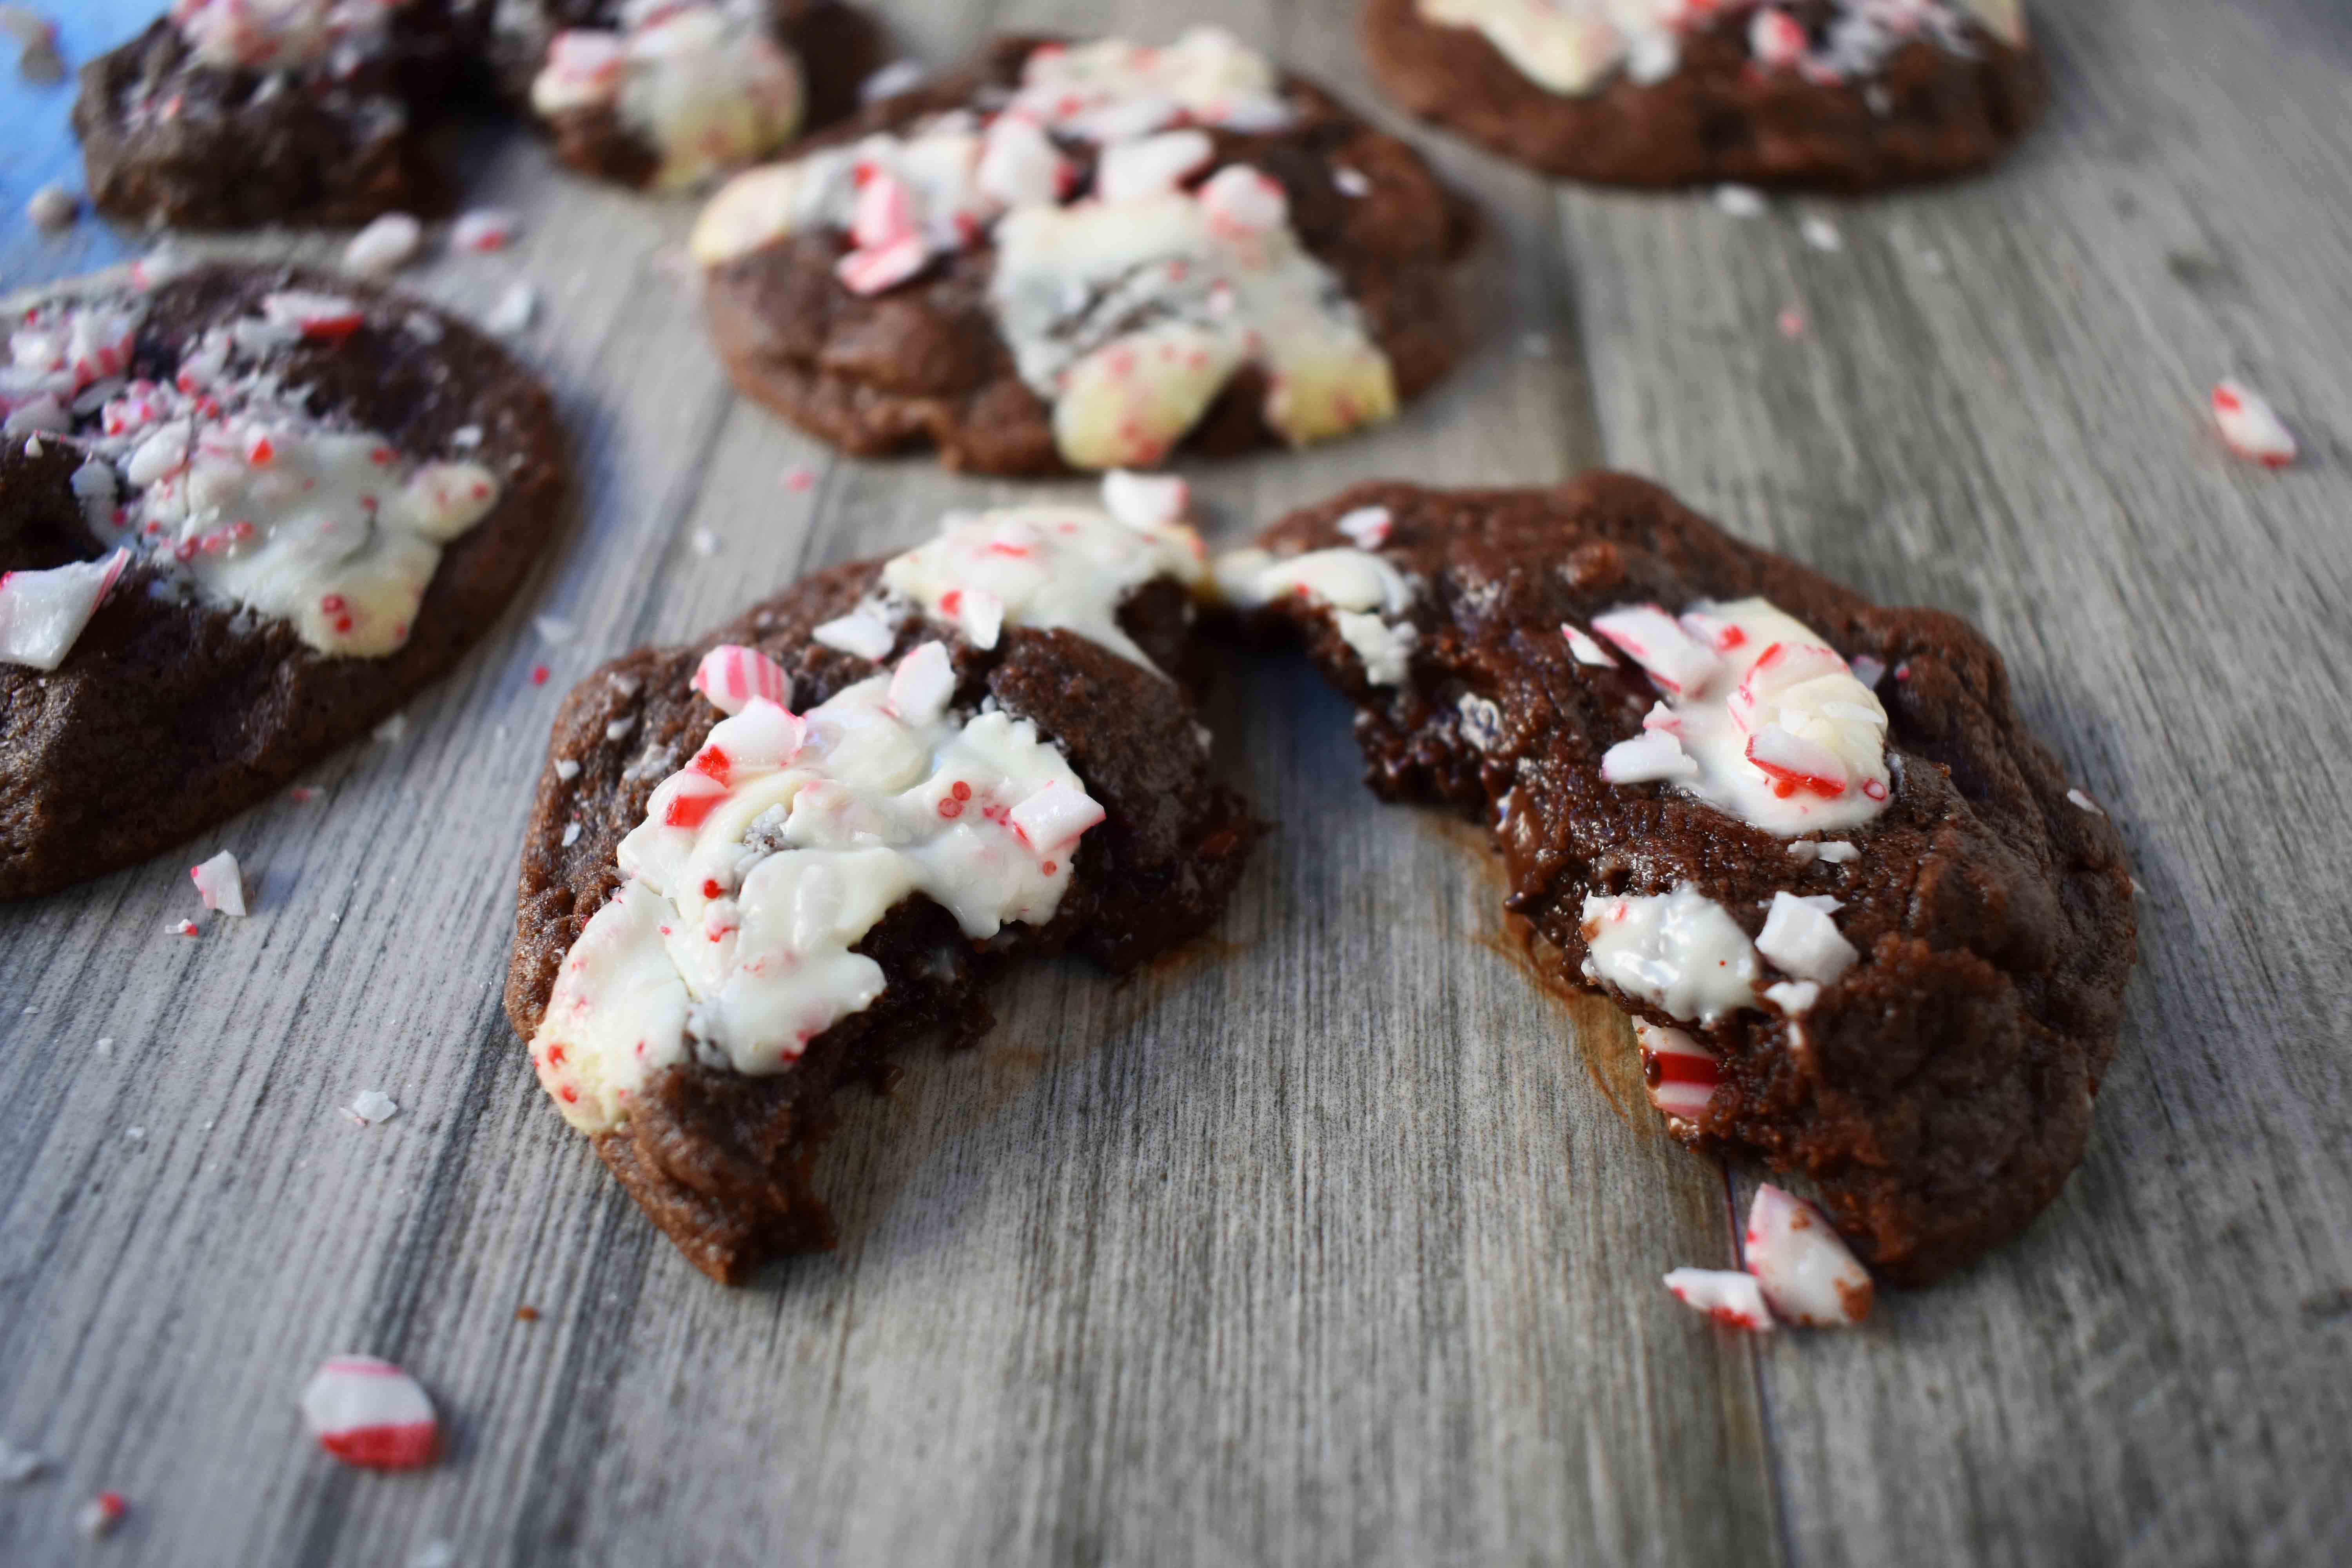 Mrs. Claus Chocolate Peppermint Cookies by Modern Honey. Rich chocolate chunks cookies with peppermint bark and candy canes. The most popular Christmas cookie!